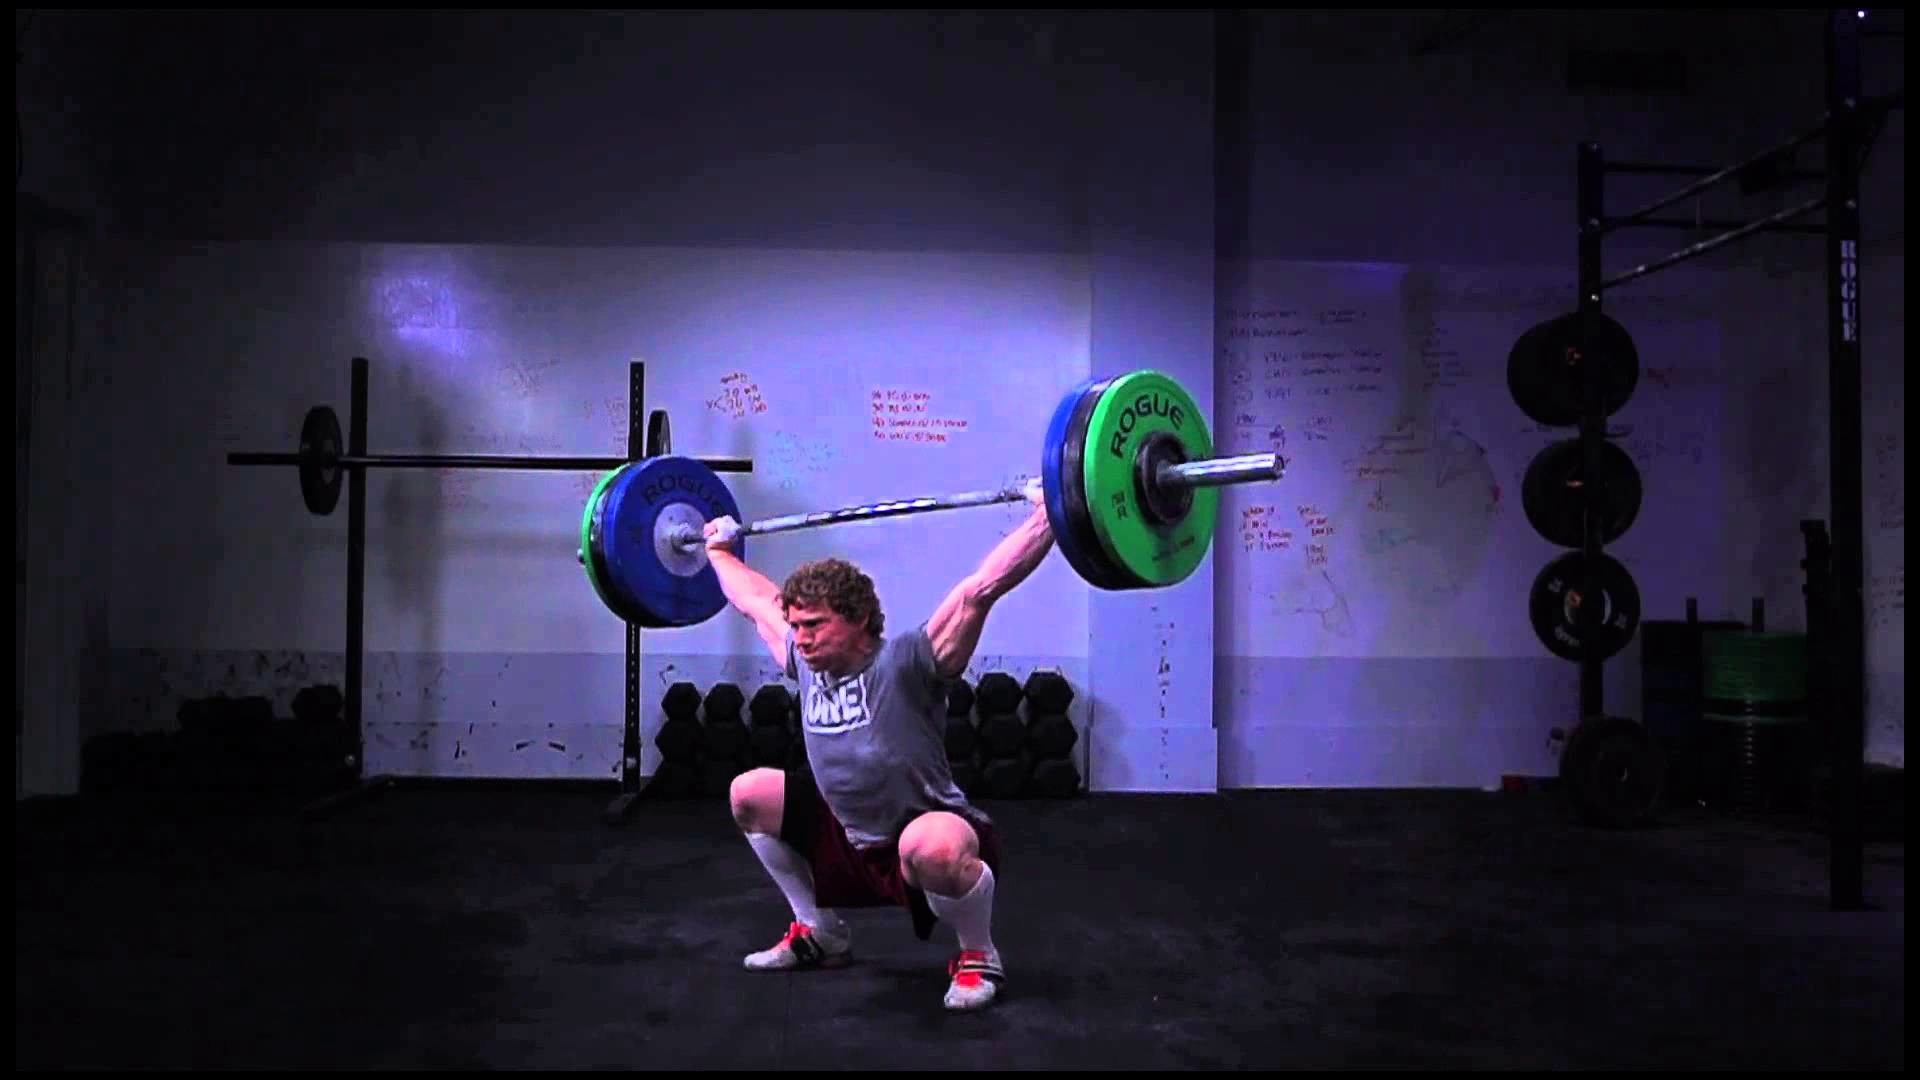 Crossfit Wallpapers (67+ images)